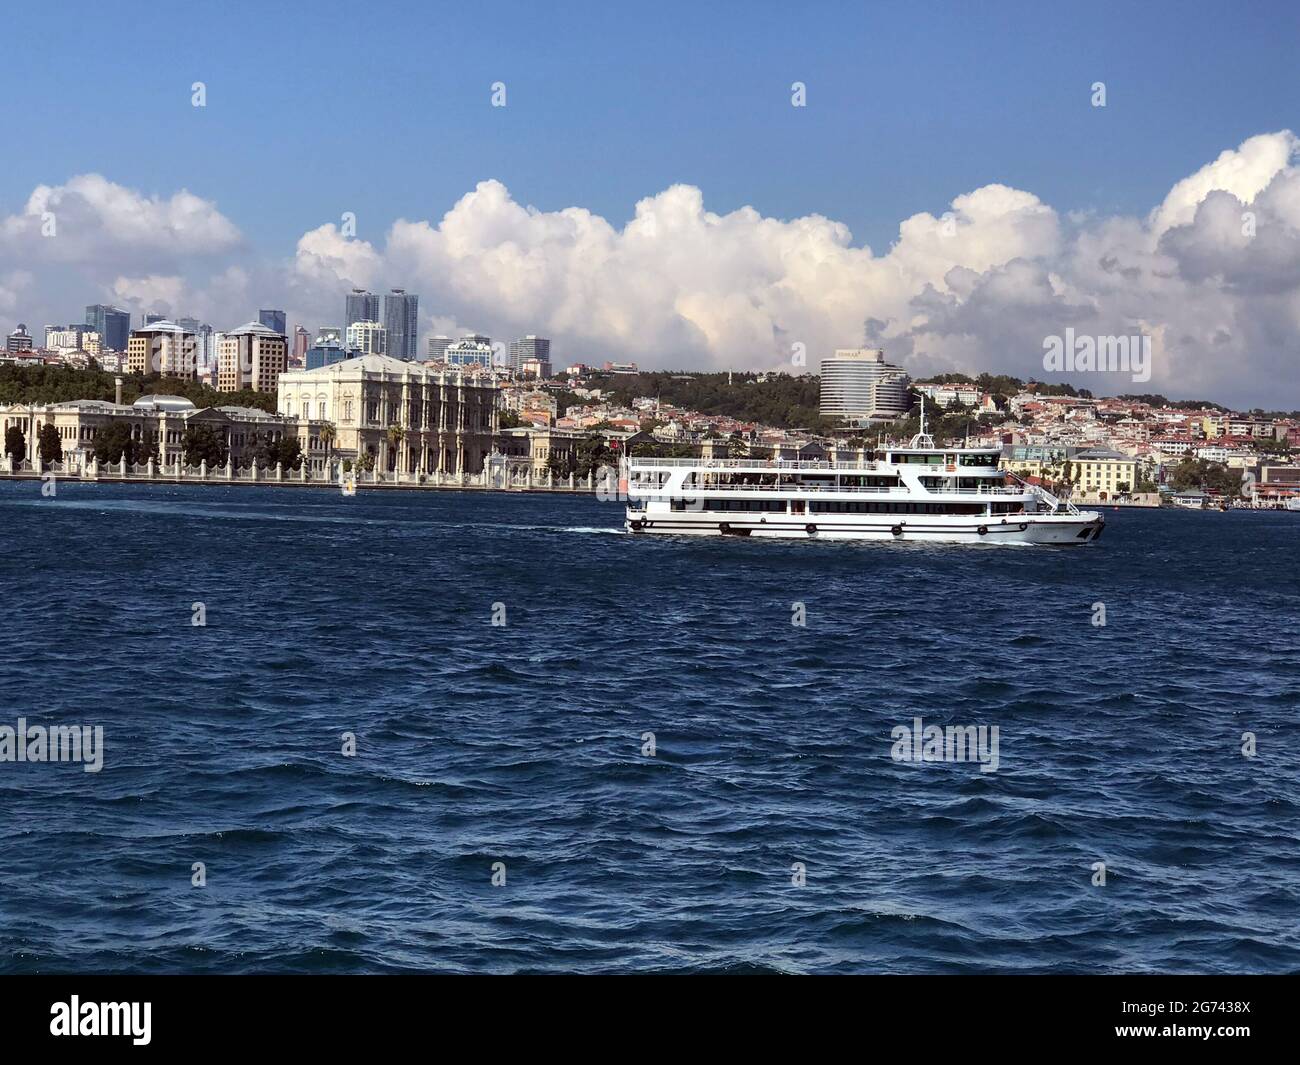 A ferry boat passes the Ciragan Palace on the Bosphorus Sea in  Istanbul, Turkey Stock Photo